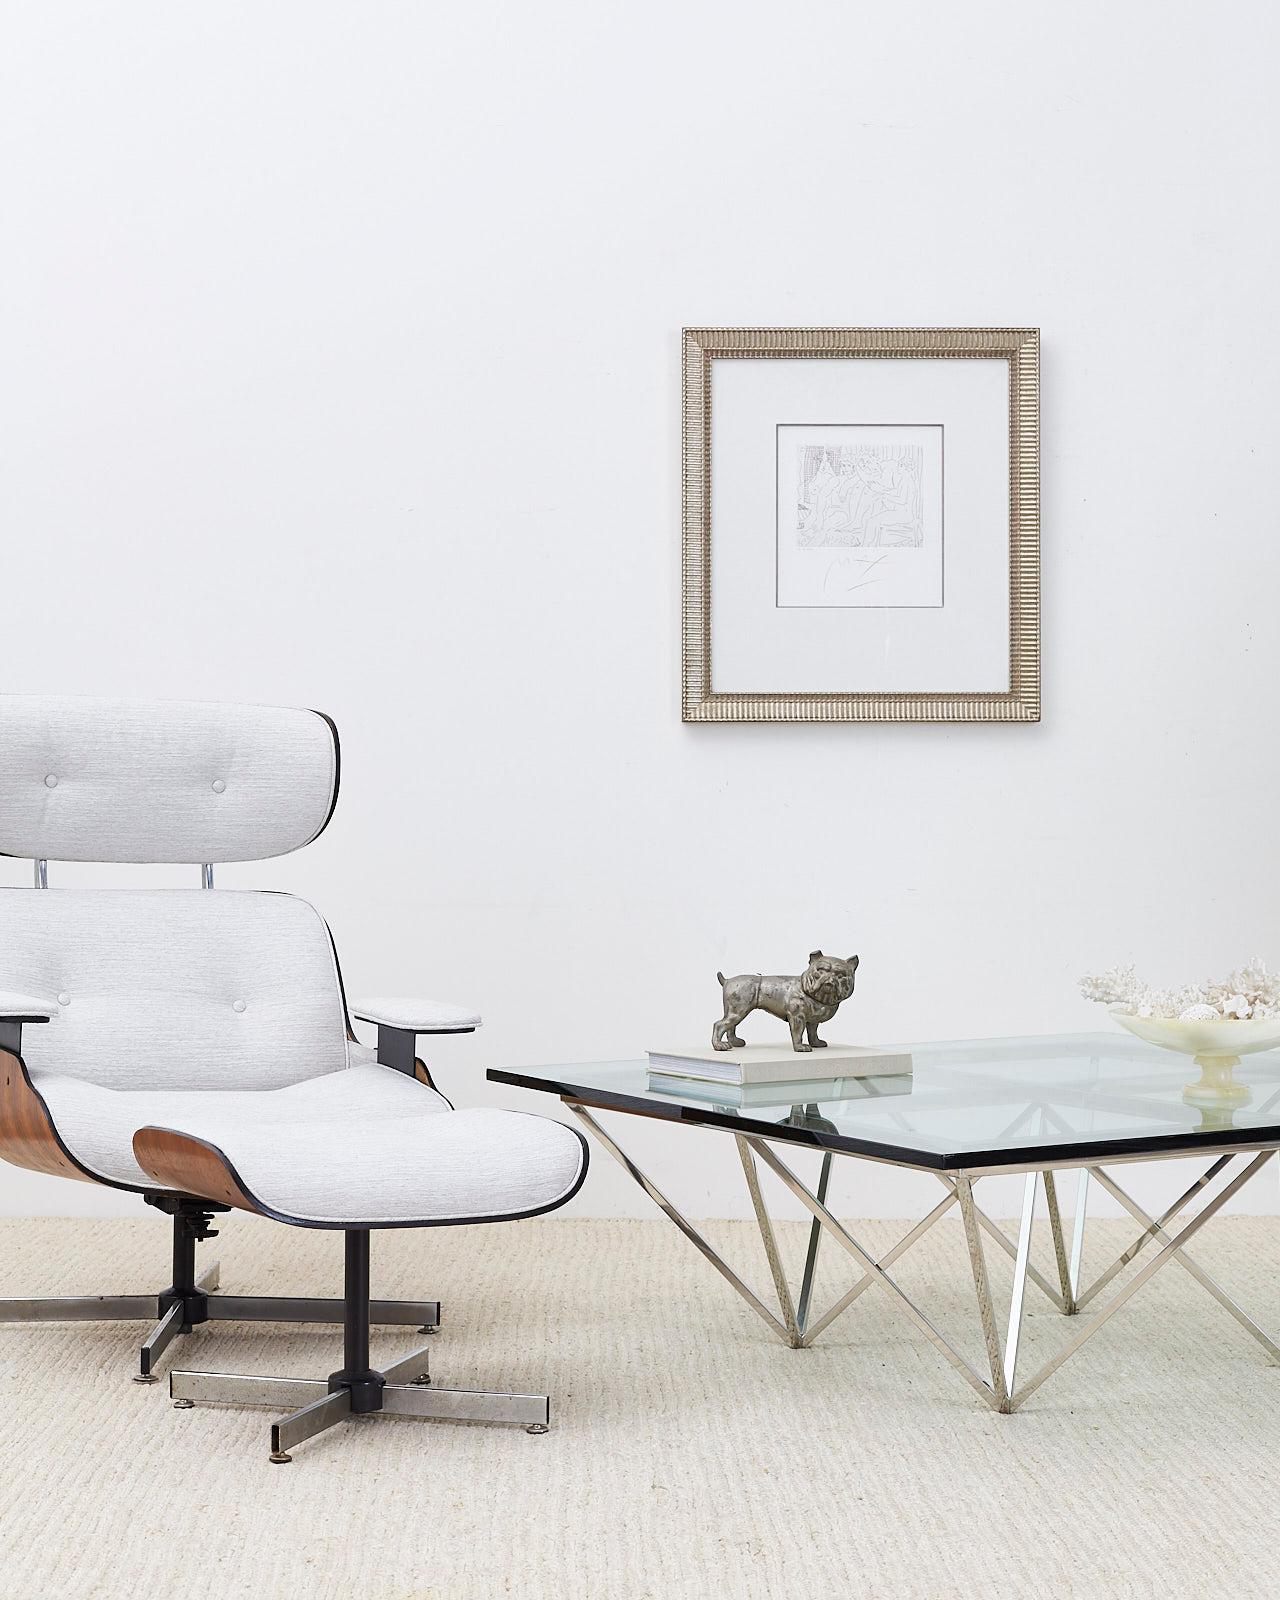 Stylish reupholstered swivel lounge chair and ottoman made in the manner and style of Charles and Ray Eames by Plycraft. Features a modern redux with a textured light gray fabric. Tufted seating surfaces with the iconic lounge chair profile. Ottoman